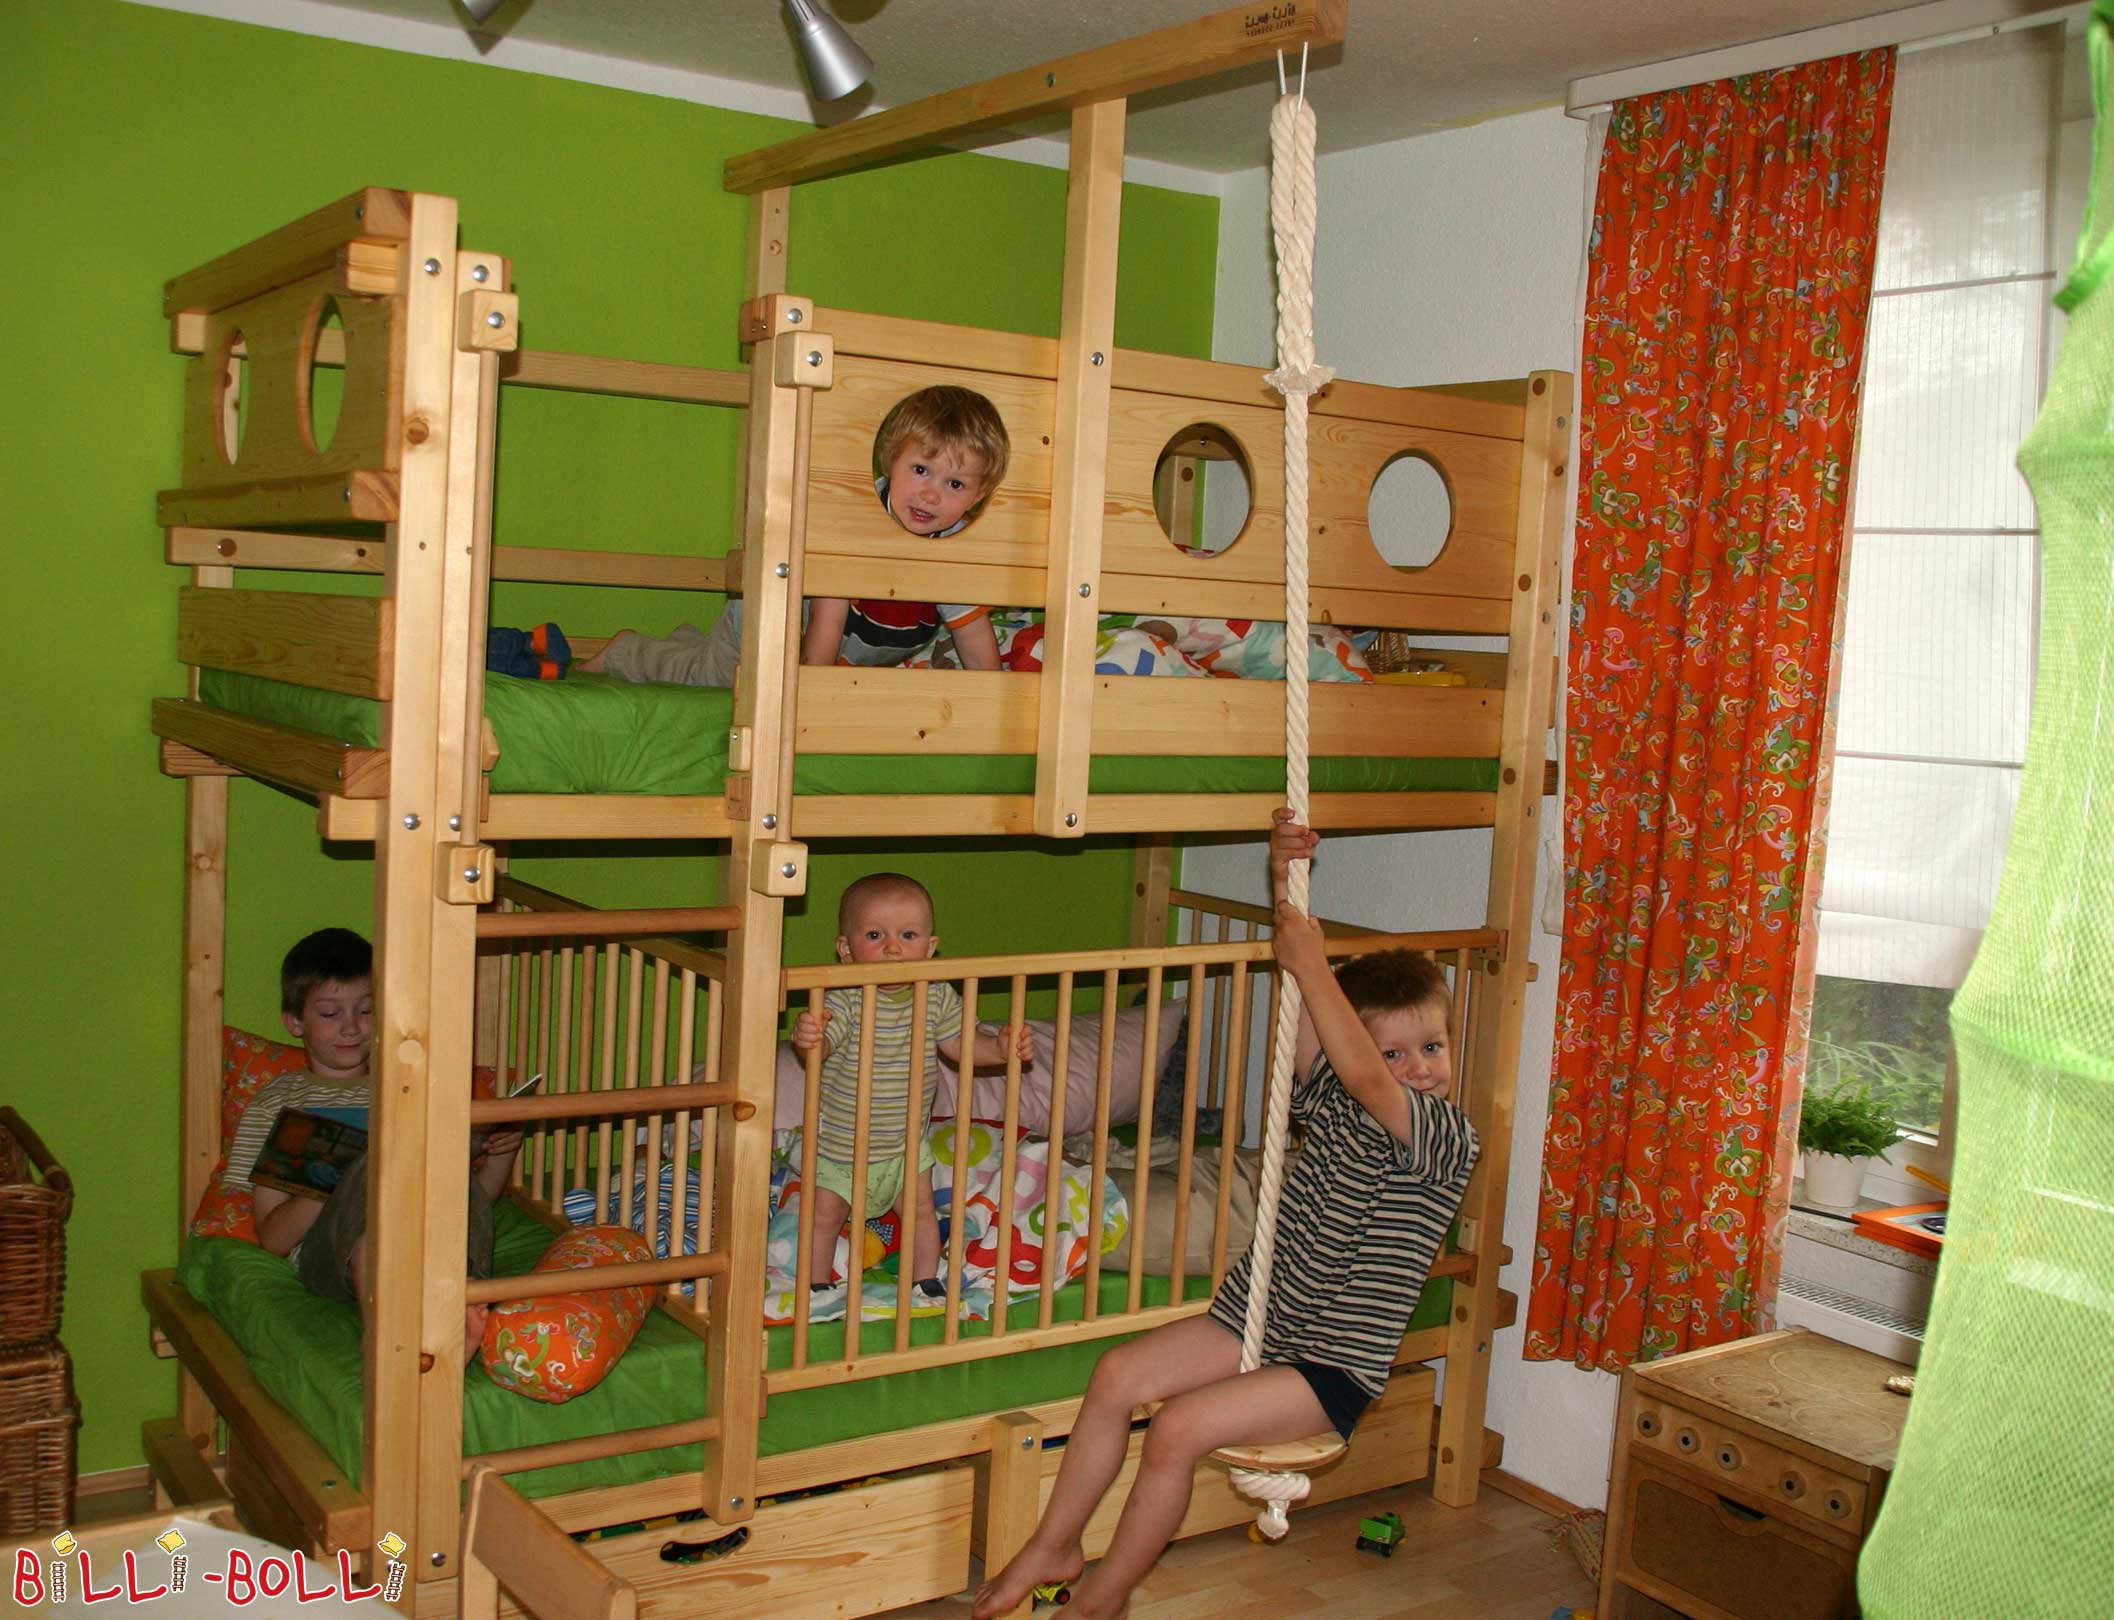 Hello dear Billi-Bolli team! As promised, here are a couple of photos of our … (Bunk Bed)